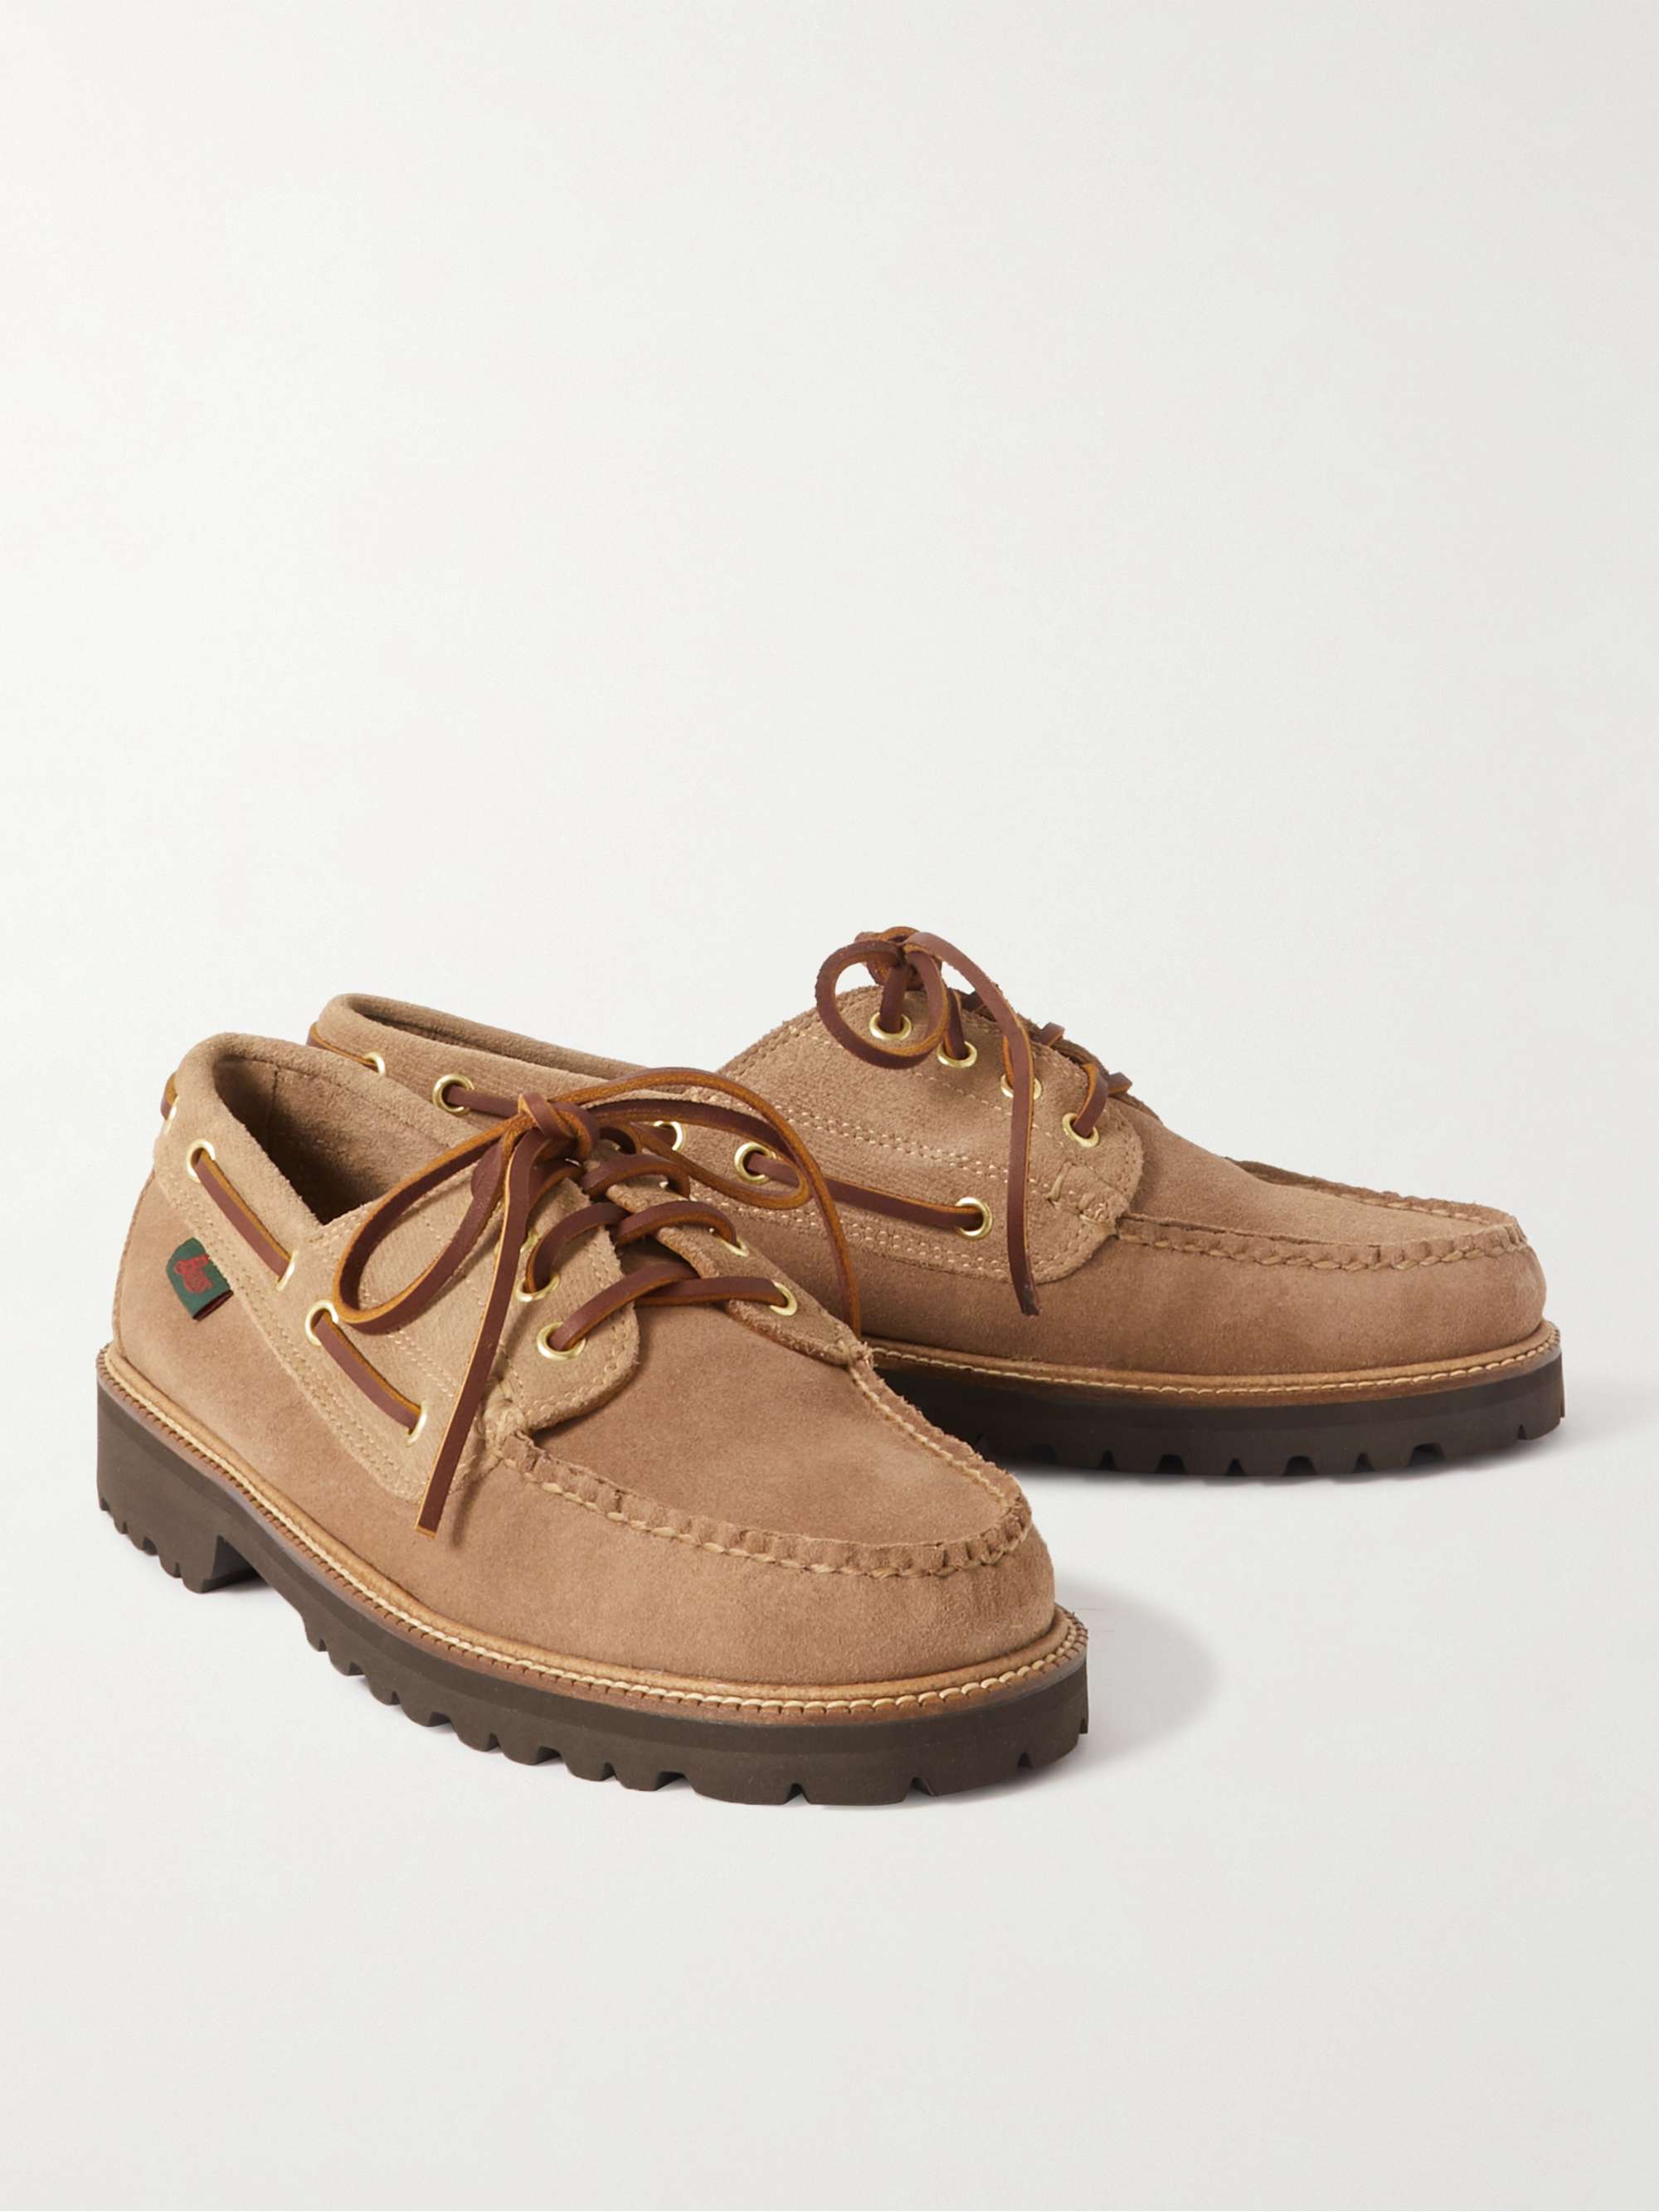 G.H. BASS & CO. Weejuns '90 Boater Mix Panelled Suede Boat Shoes